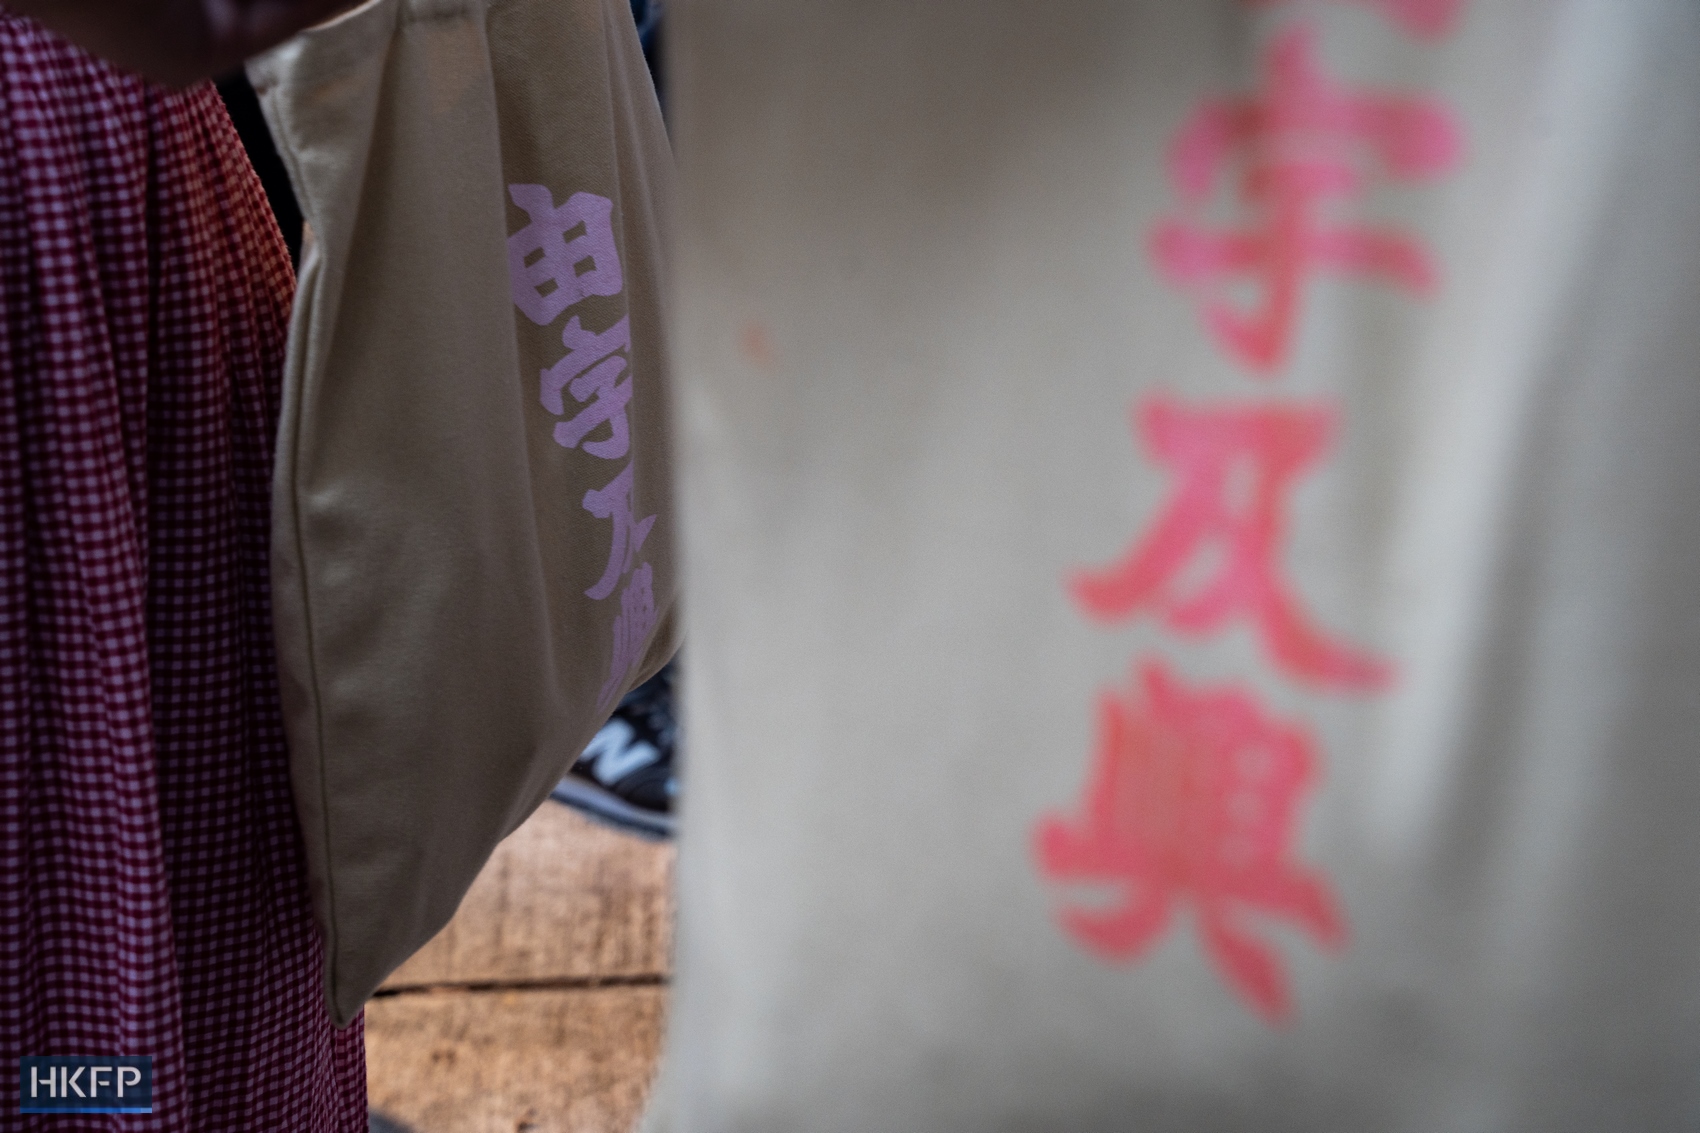 Readers carry a canvas tote bag showcasing the Chinese phrase "From words to prosperity" - an apparent parody of the government's narrative "From stability to prosperity" - on March, 31, 2024. Photo: Kyle Lam/HKFP.